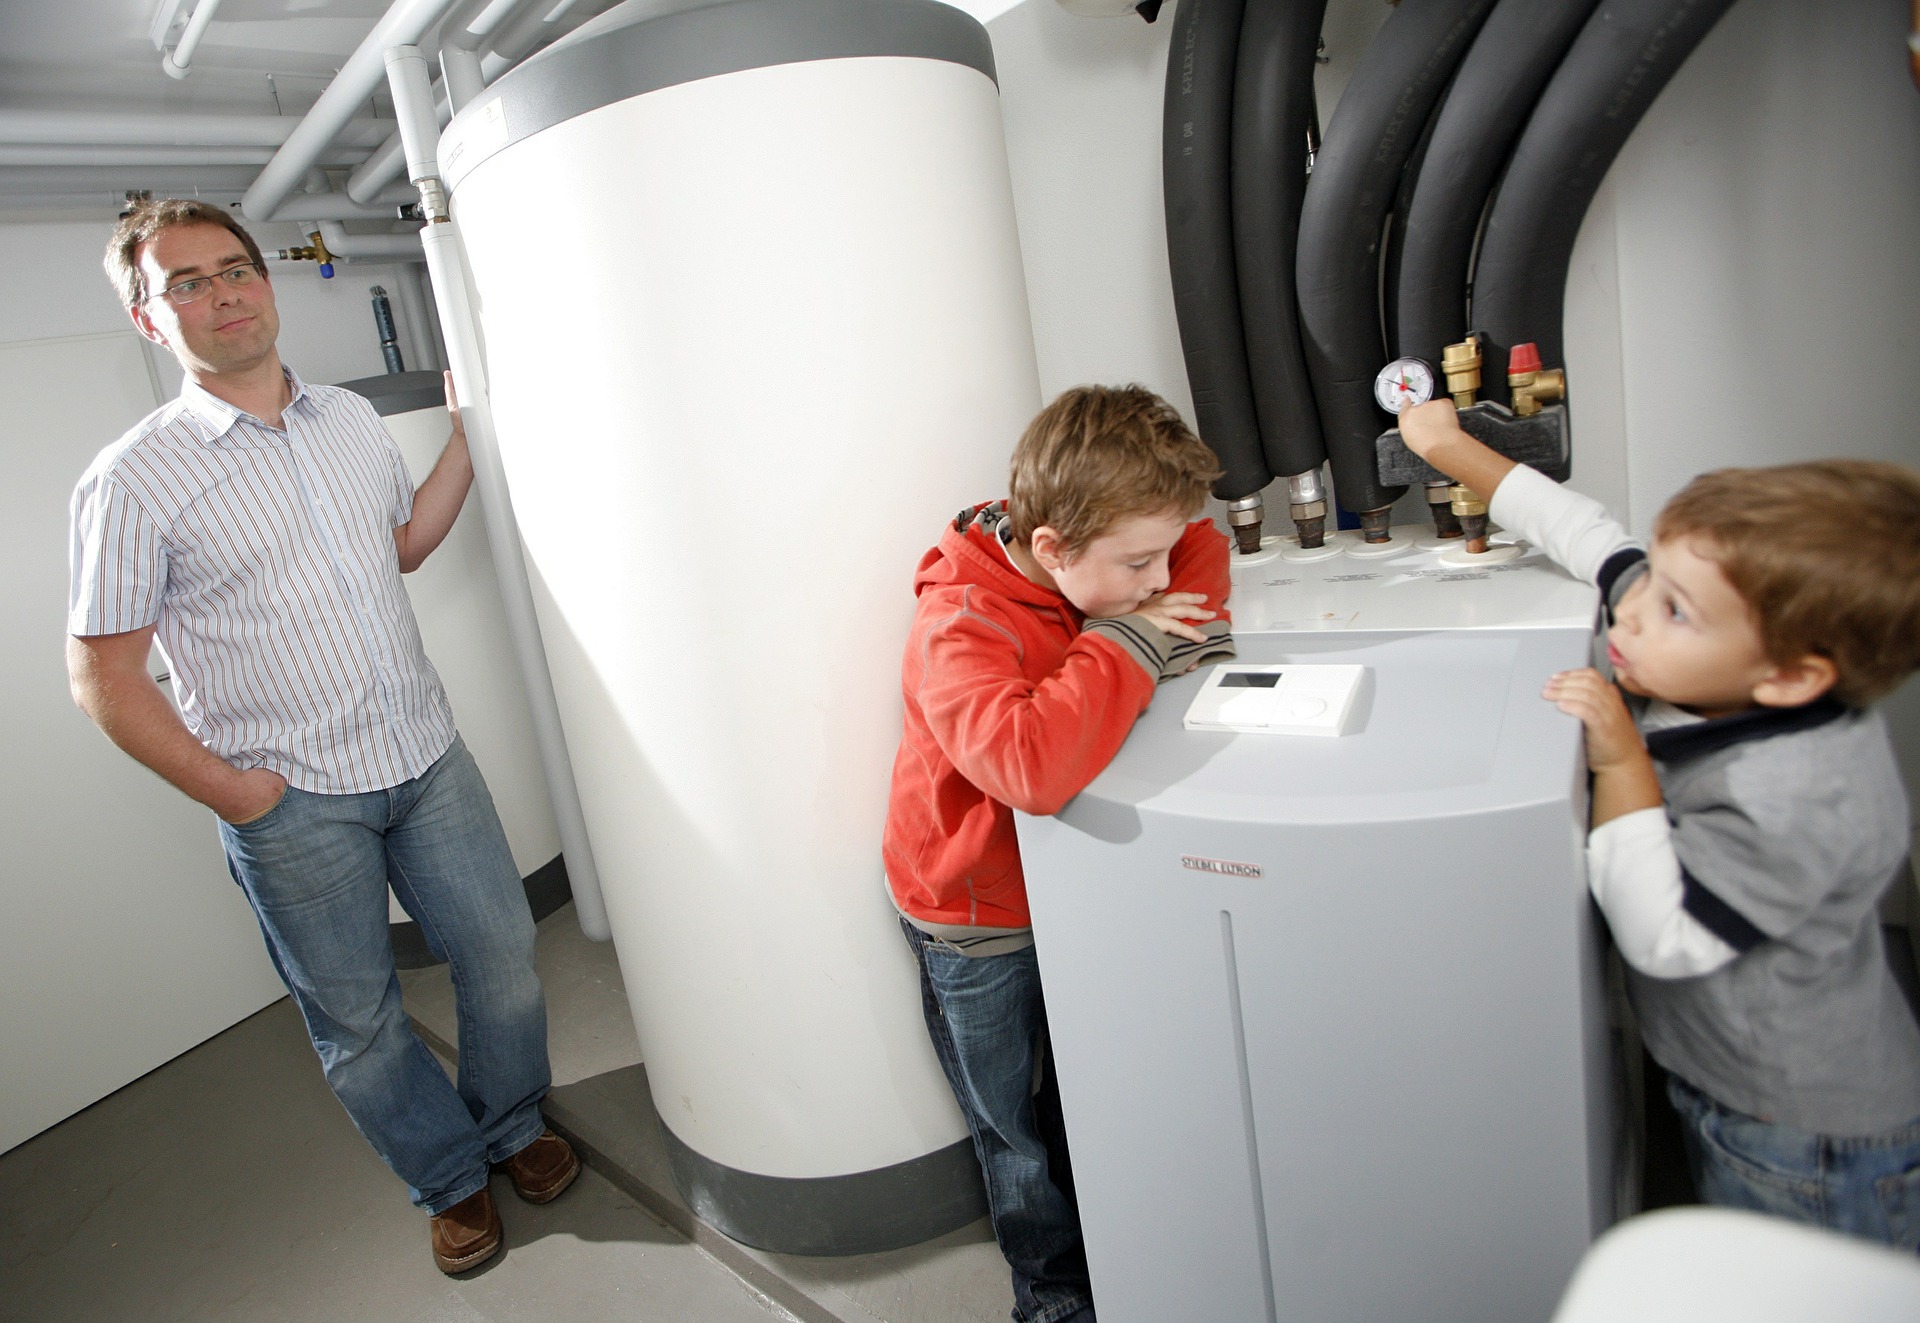 Heat pumps perform successfully across Europe – New consumer analysis